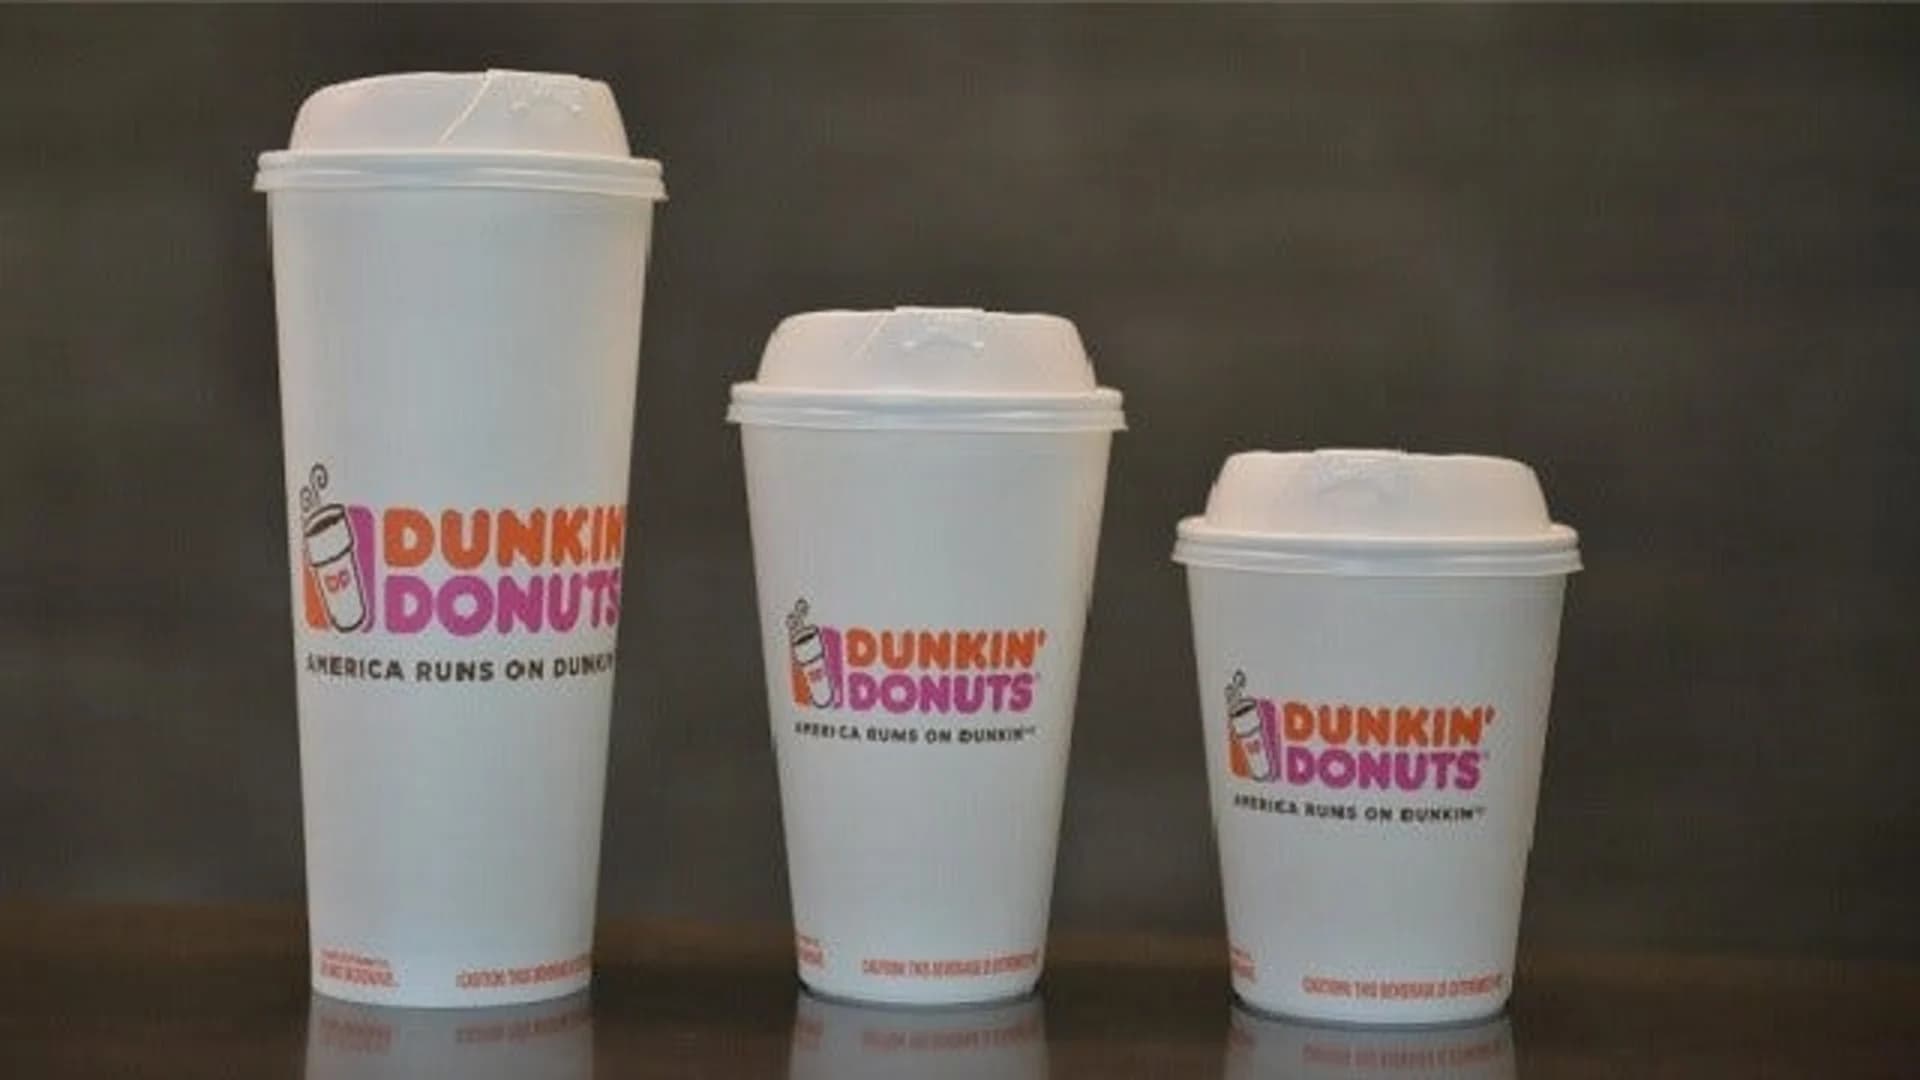 Dunkin’ Donuts to stop using foam cups by 2020